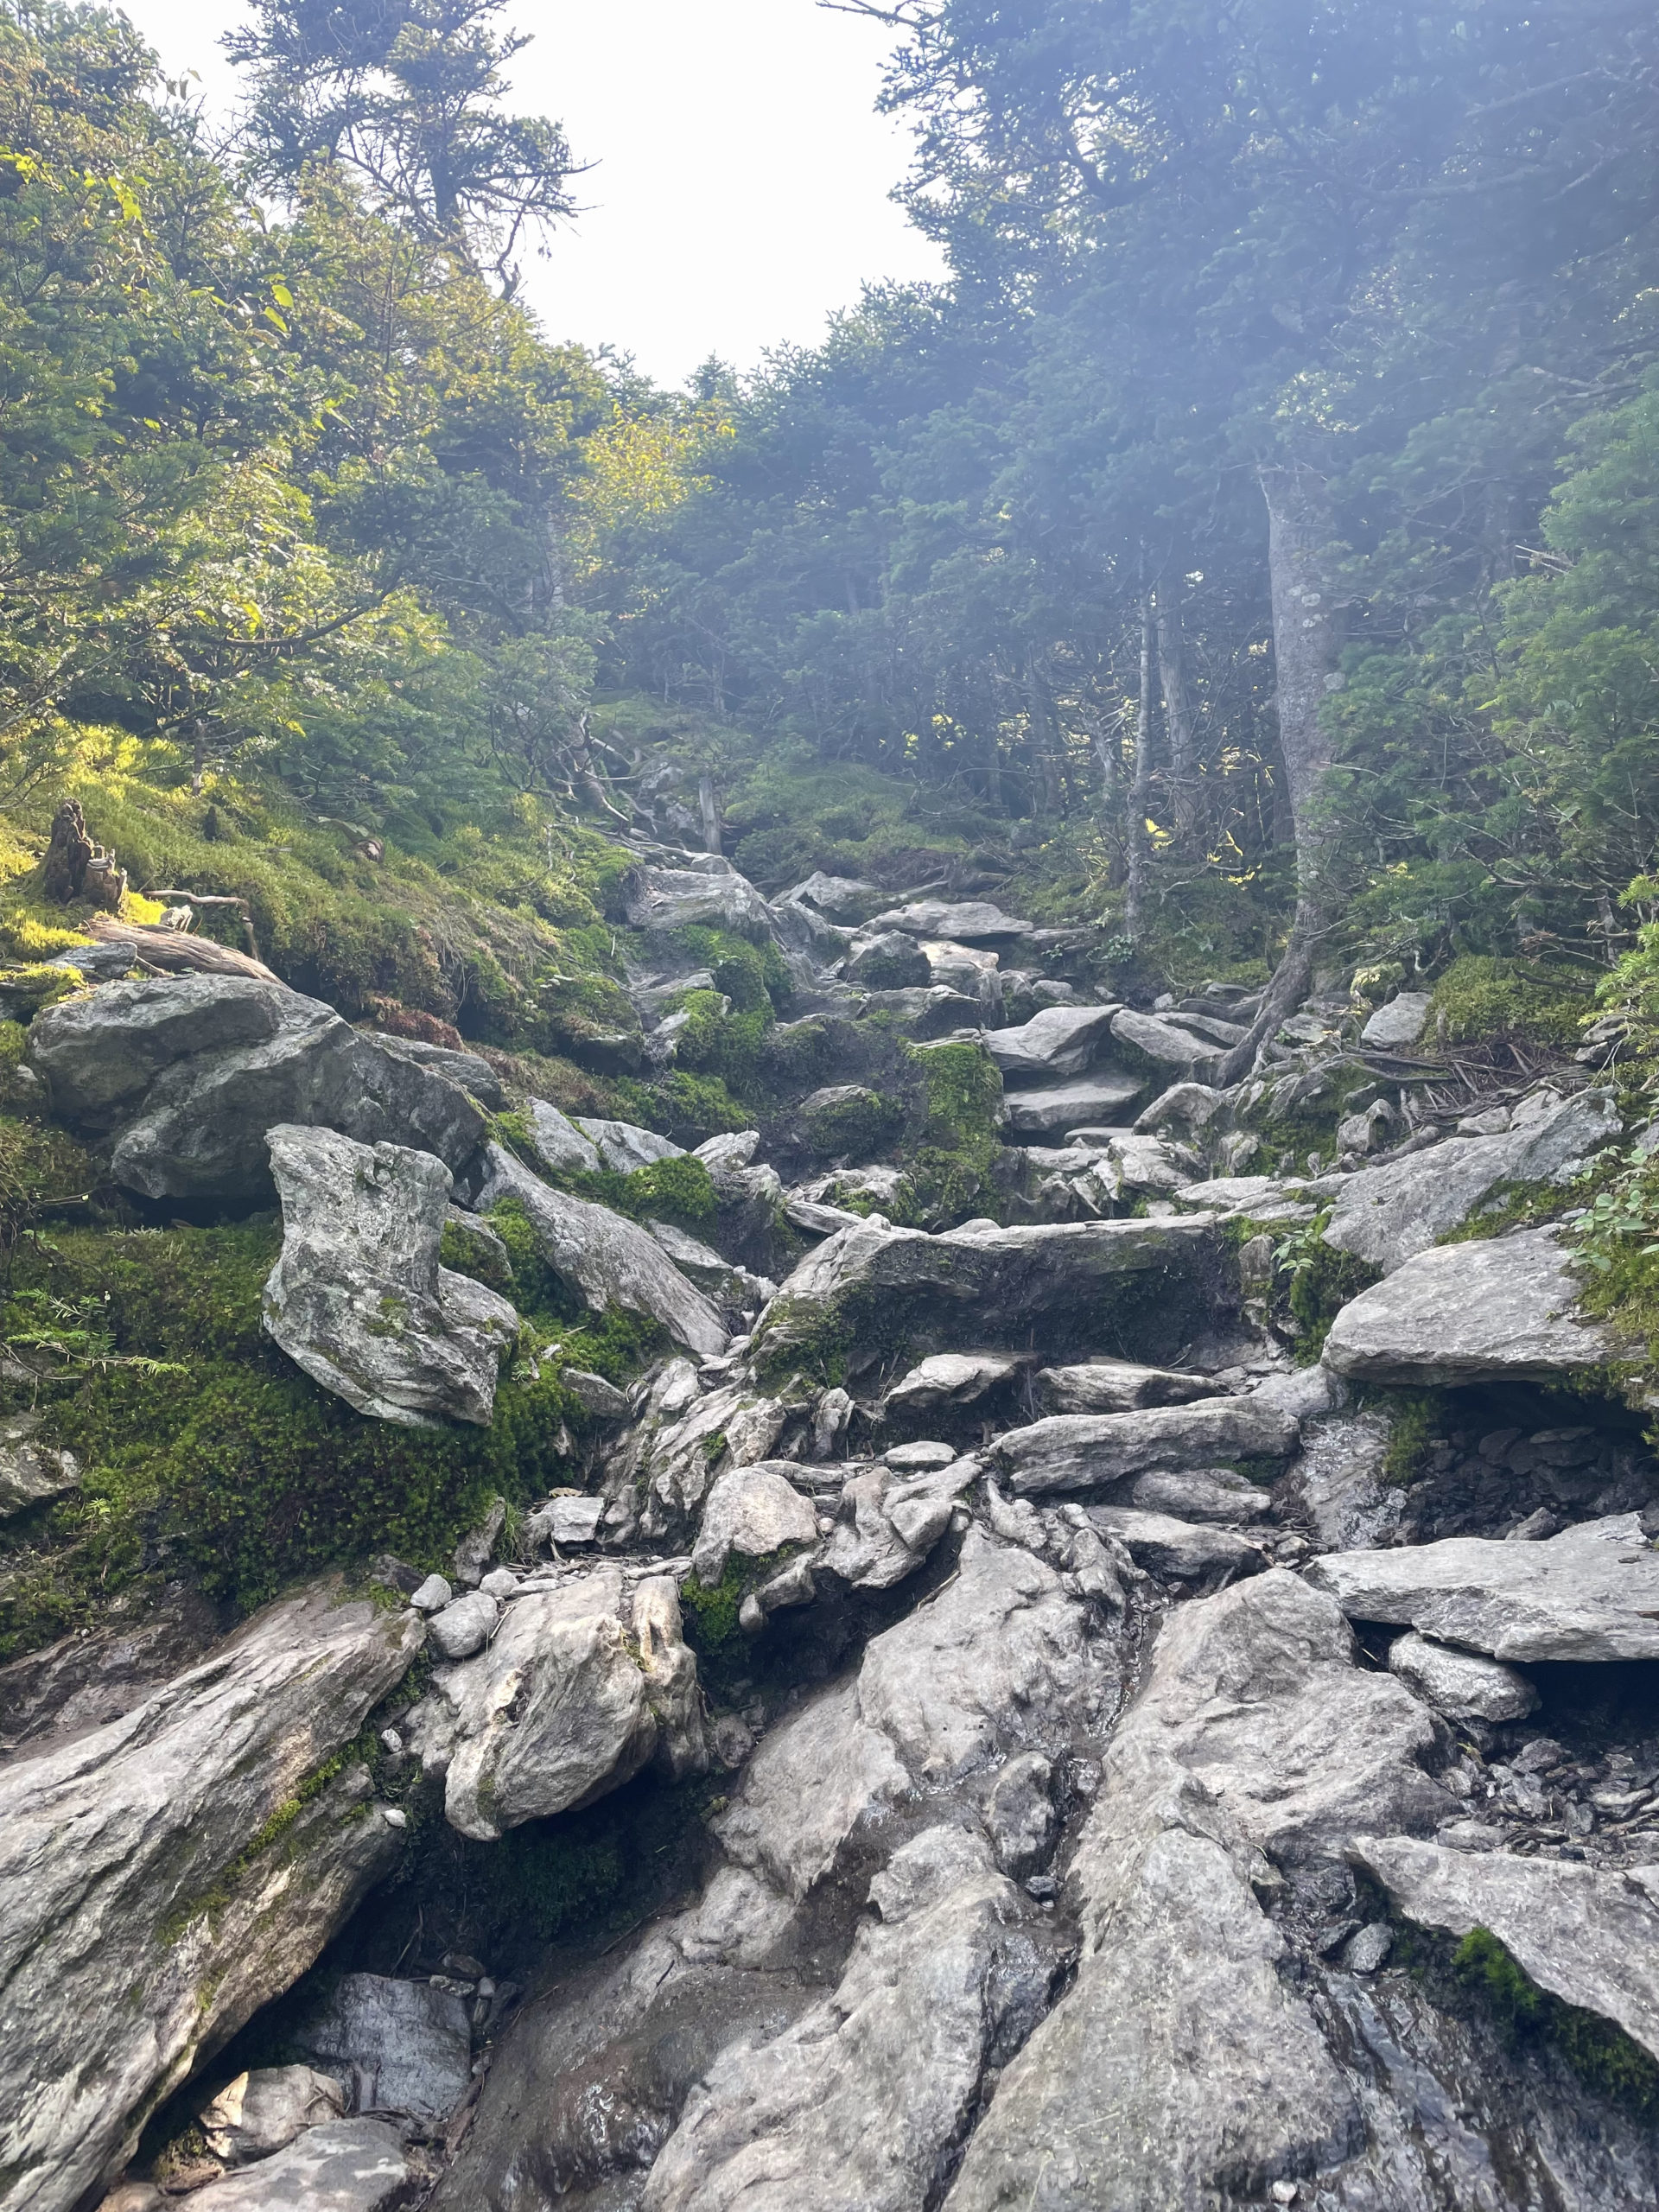 Rocky ascent, seen while hiking Camel's Hump in the Green Mountains, Vermont